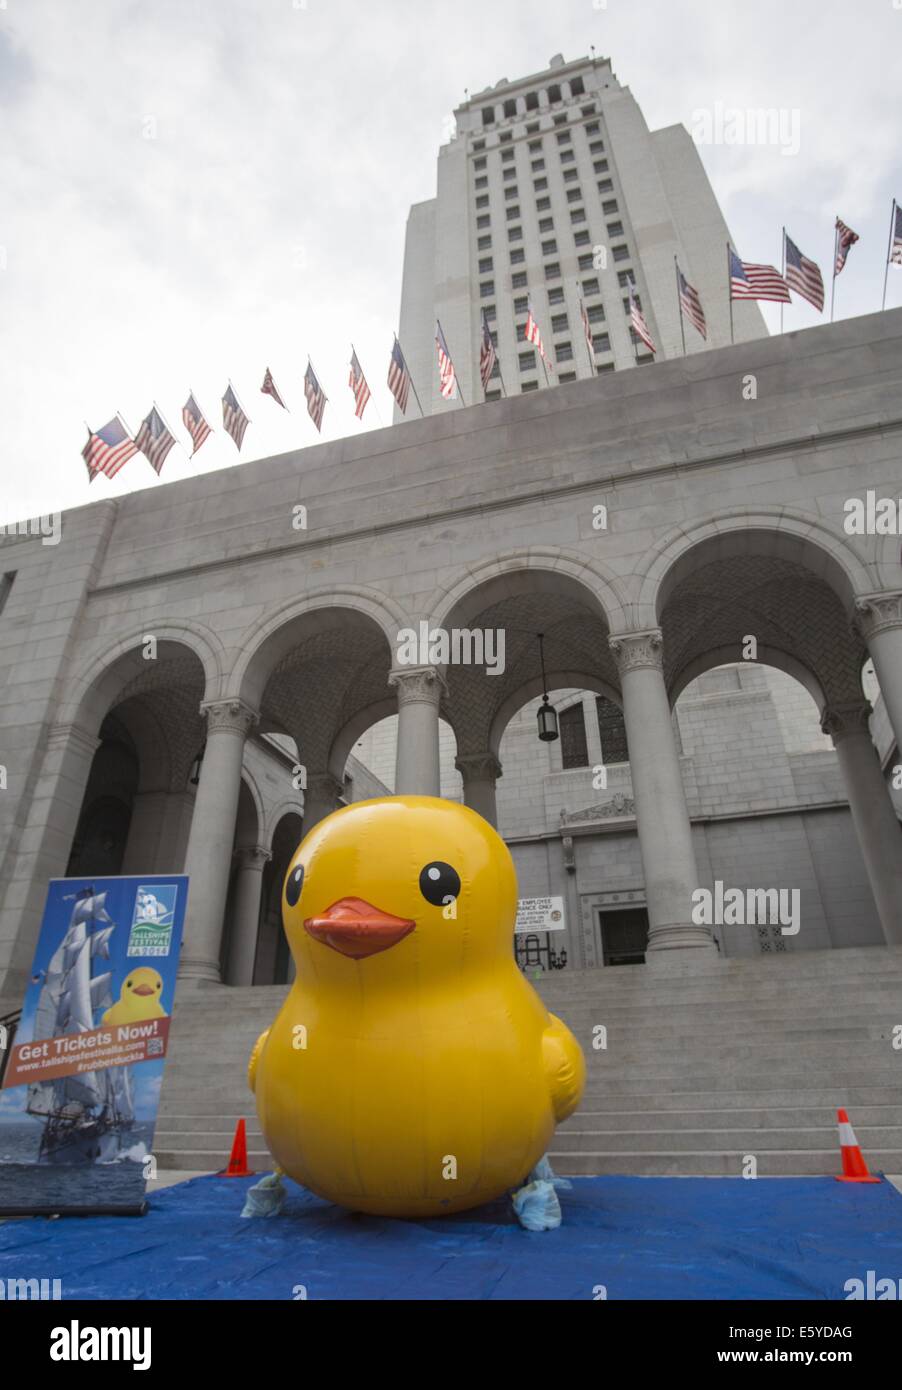 Los Angeles, California, USA. 8th Aug, 2014. A 10-foot-tall rubber ducky ''baby duck'' squatting on the Spring Street steps of Los Angeles City Hall on Friday, Aug. 8, 2014, in Los Angeles. The bright yellow, inflatable ducky is wandering the city in search of its mother, a 60 feet high and dubbed by event organizers as the world's largest rubber ducky as part of a promotional stunt for the Tall Ships Festival taking place Aug. 20-24 at the Port of Los Angeles. Credit:  Ringo Chiu/ZUMA Wire/Alamy Live News Stock Photo